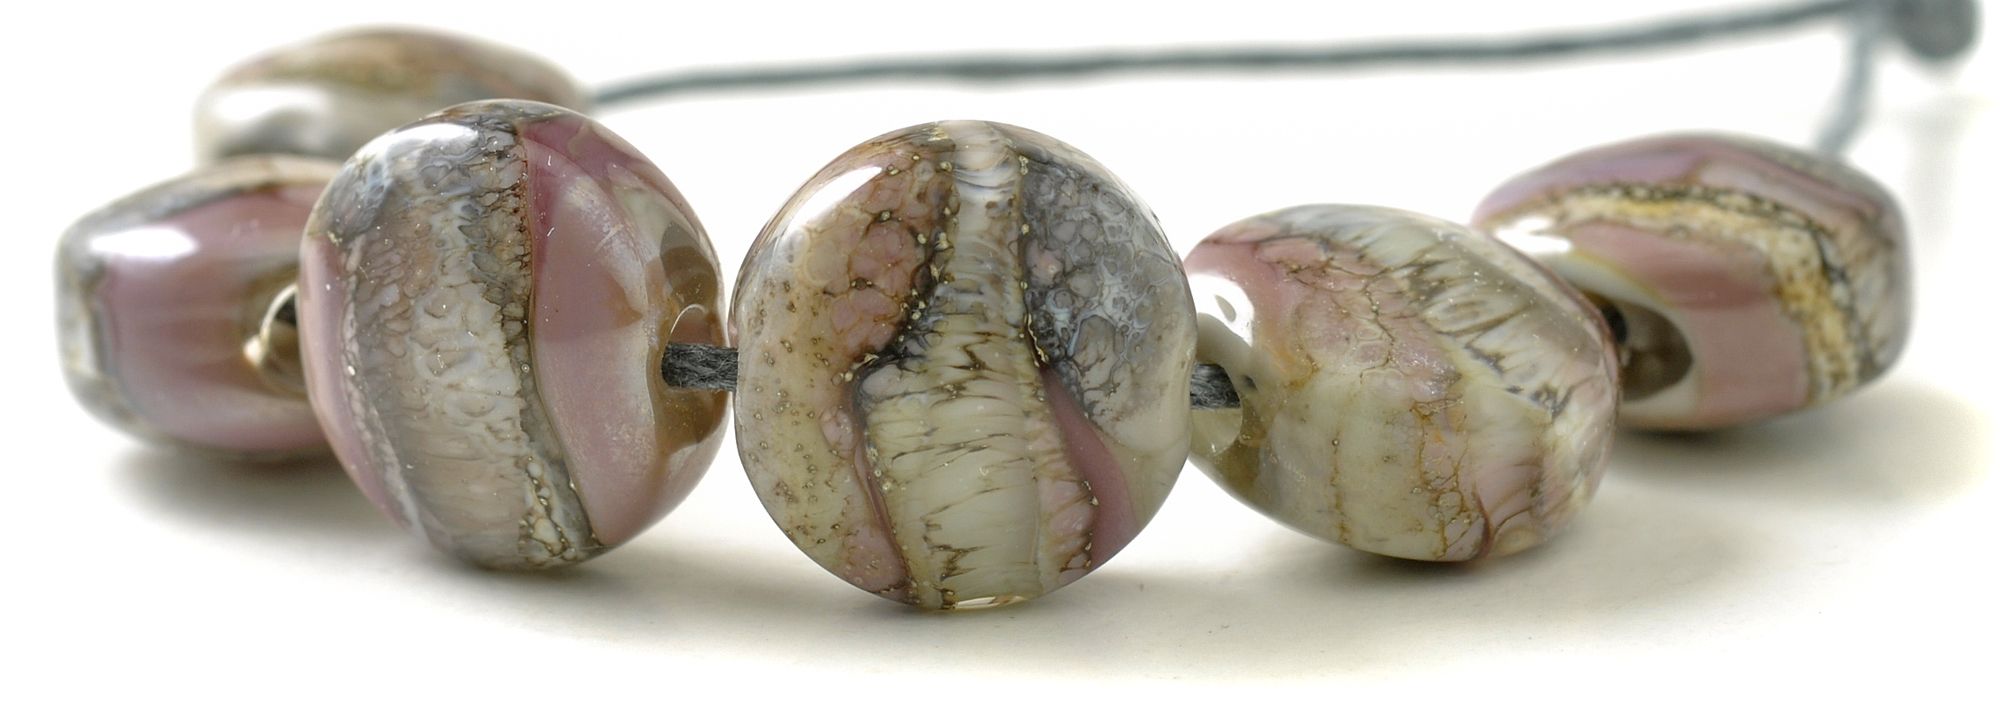 Eva Bean Beads | Lampwork Glass Beads for Collectors and Makers